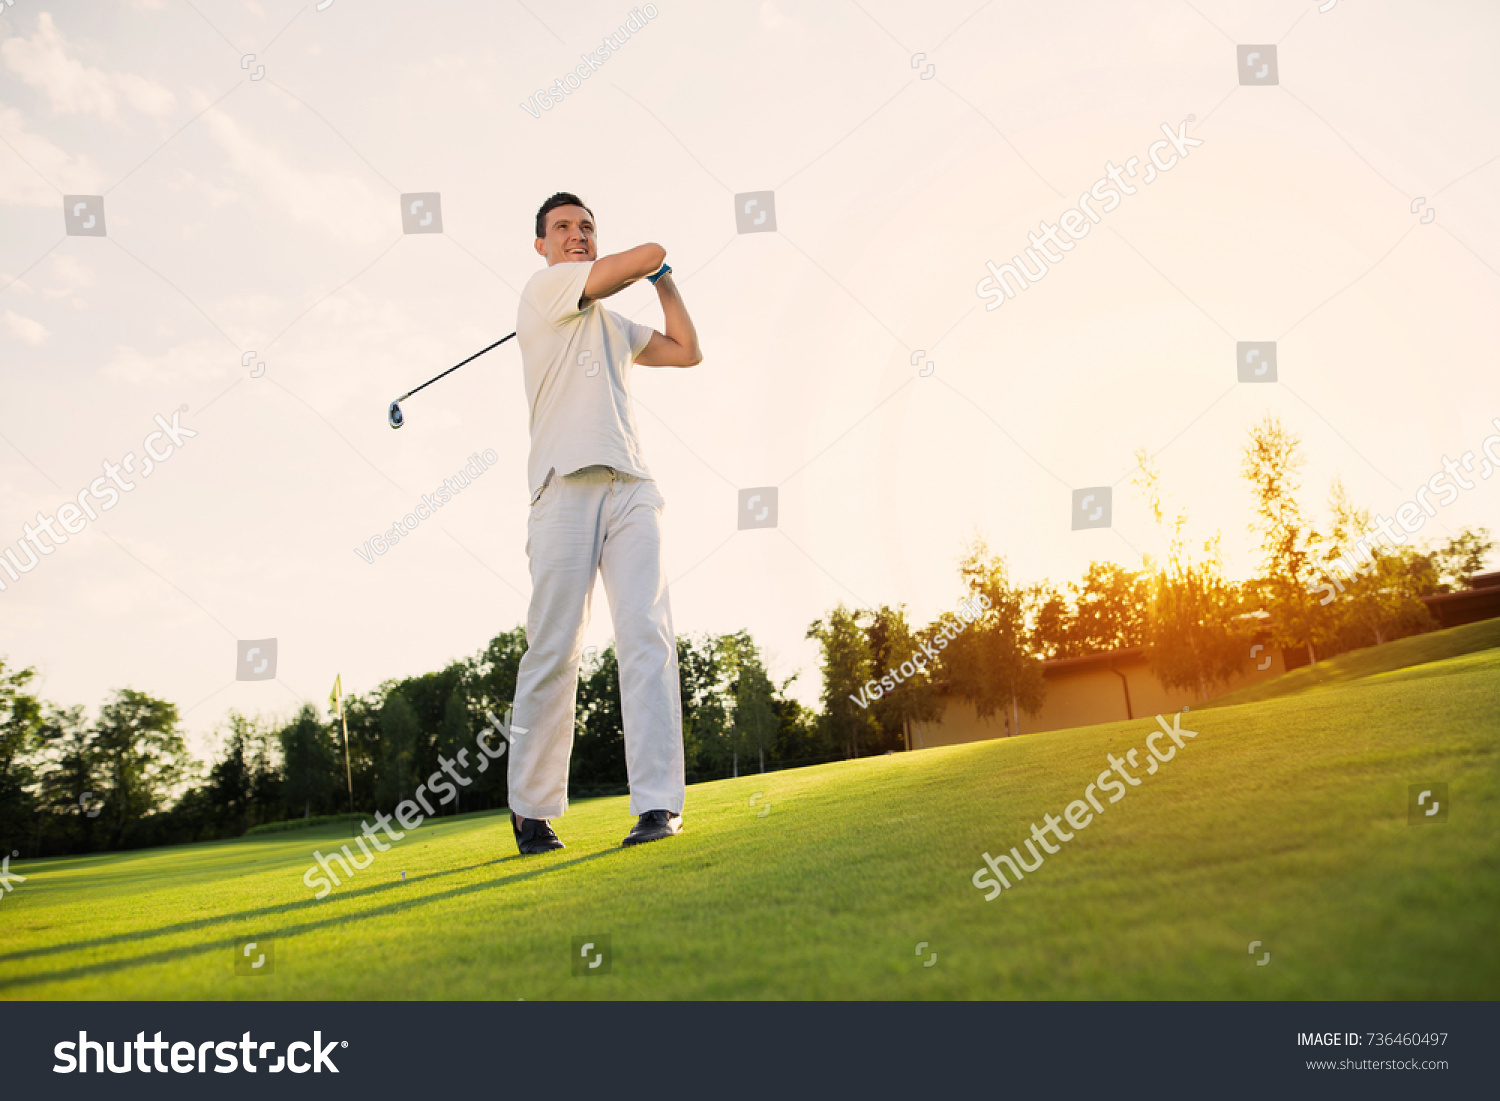 A man in a white suit is playing golf and just hit. He smiles, because the blow was excellent #736460497